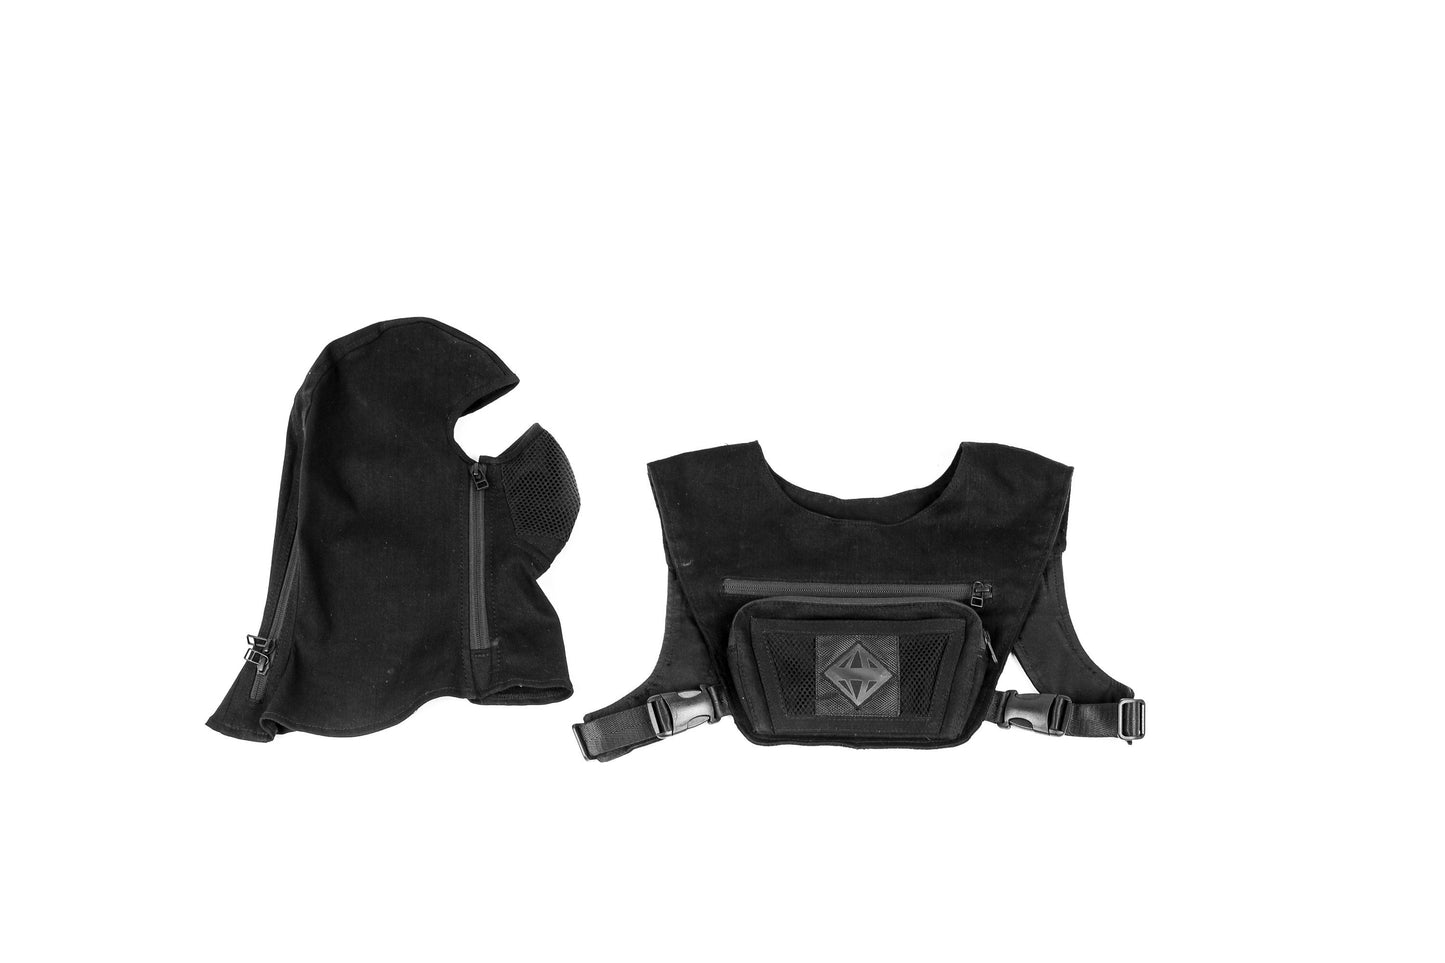 Ninja Sport Utility Chest Pack Vest With Phone Pocket and Facial Recognition Mask with Filter and Techwear Hood